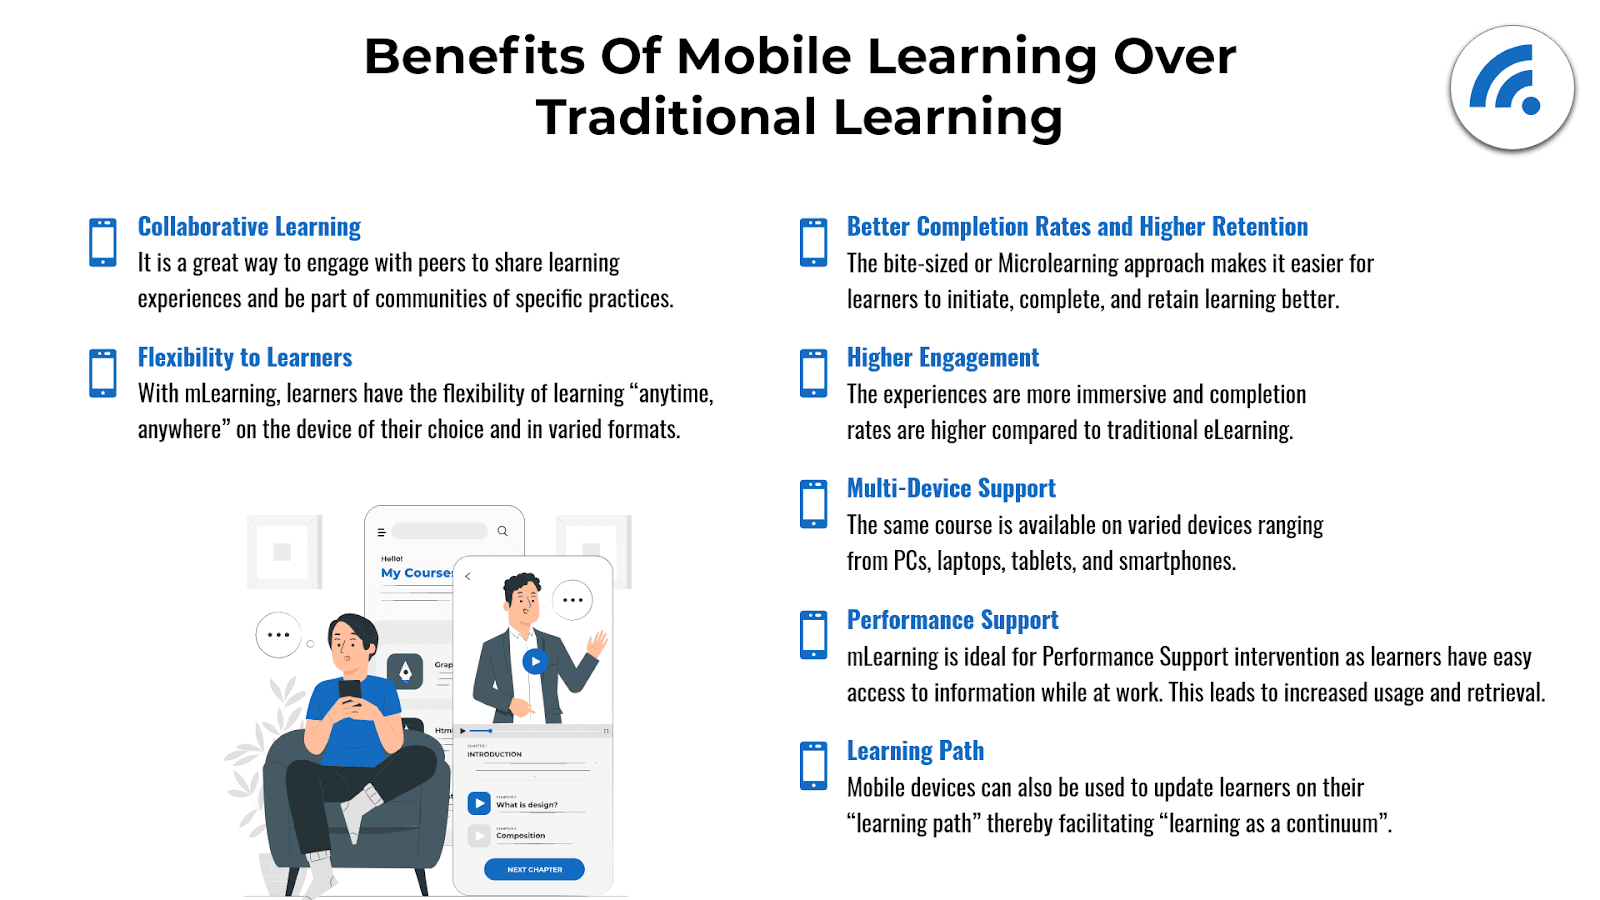 Benefits of mobile learning over traditional learning